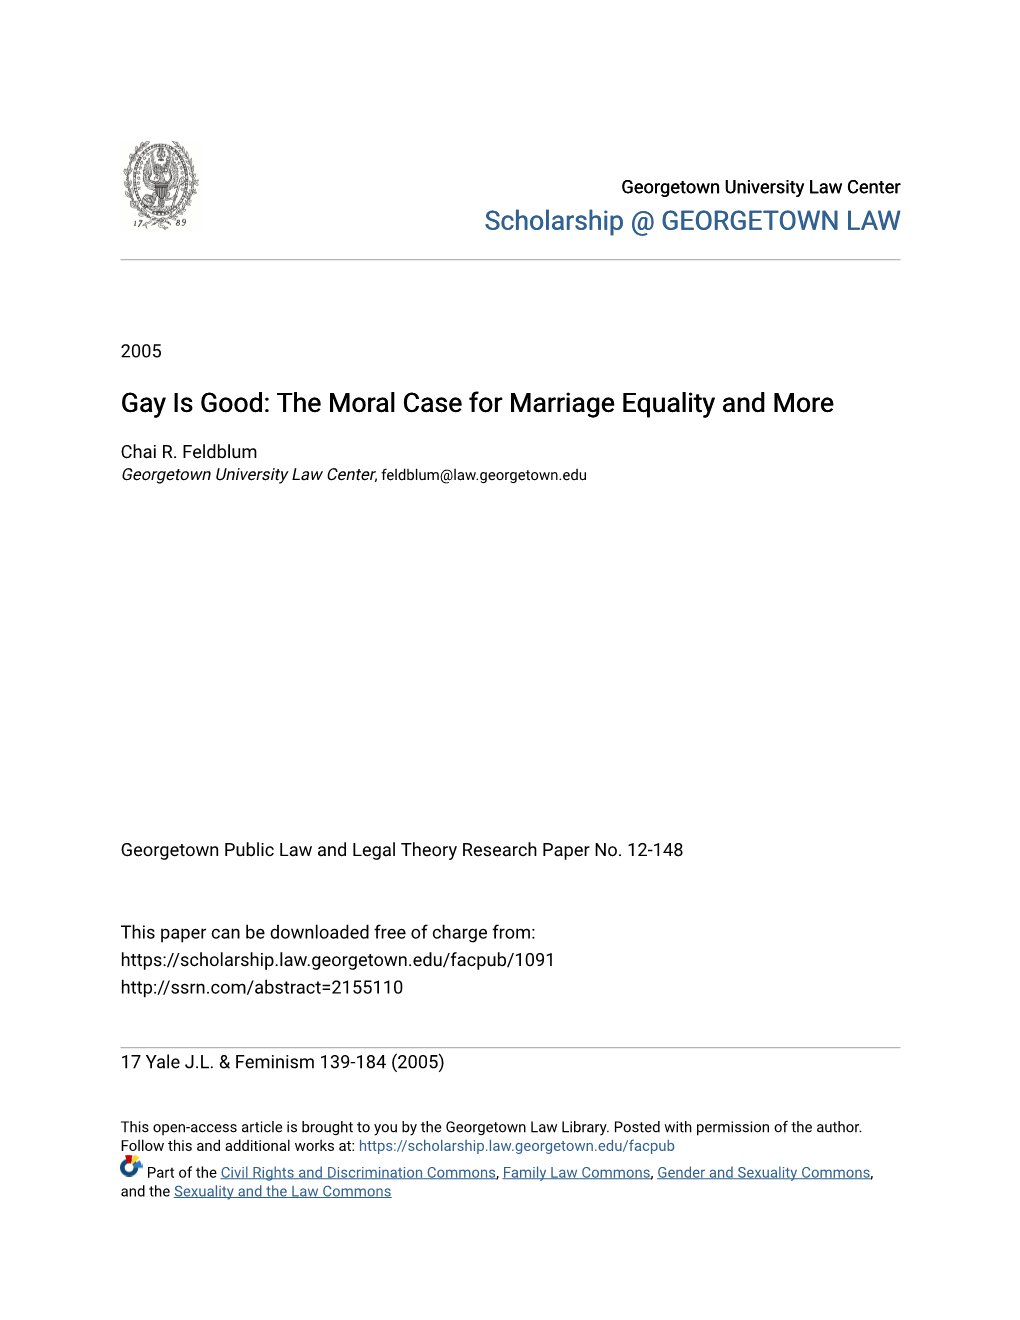 Gay Is Good: the Moral Case for Marriage Equality and More